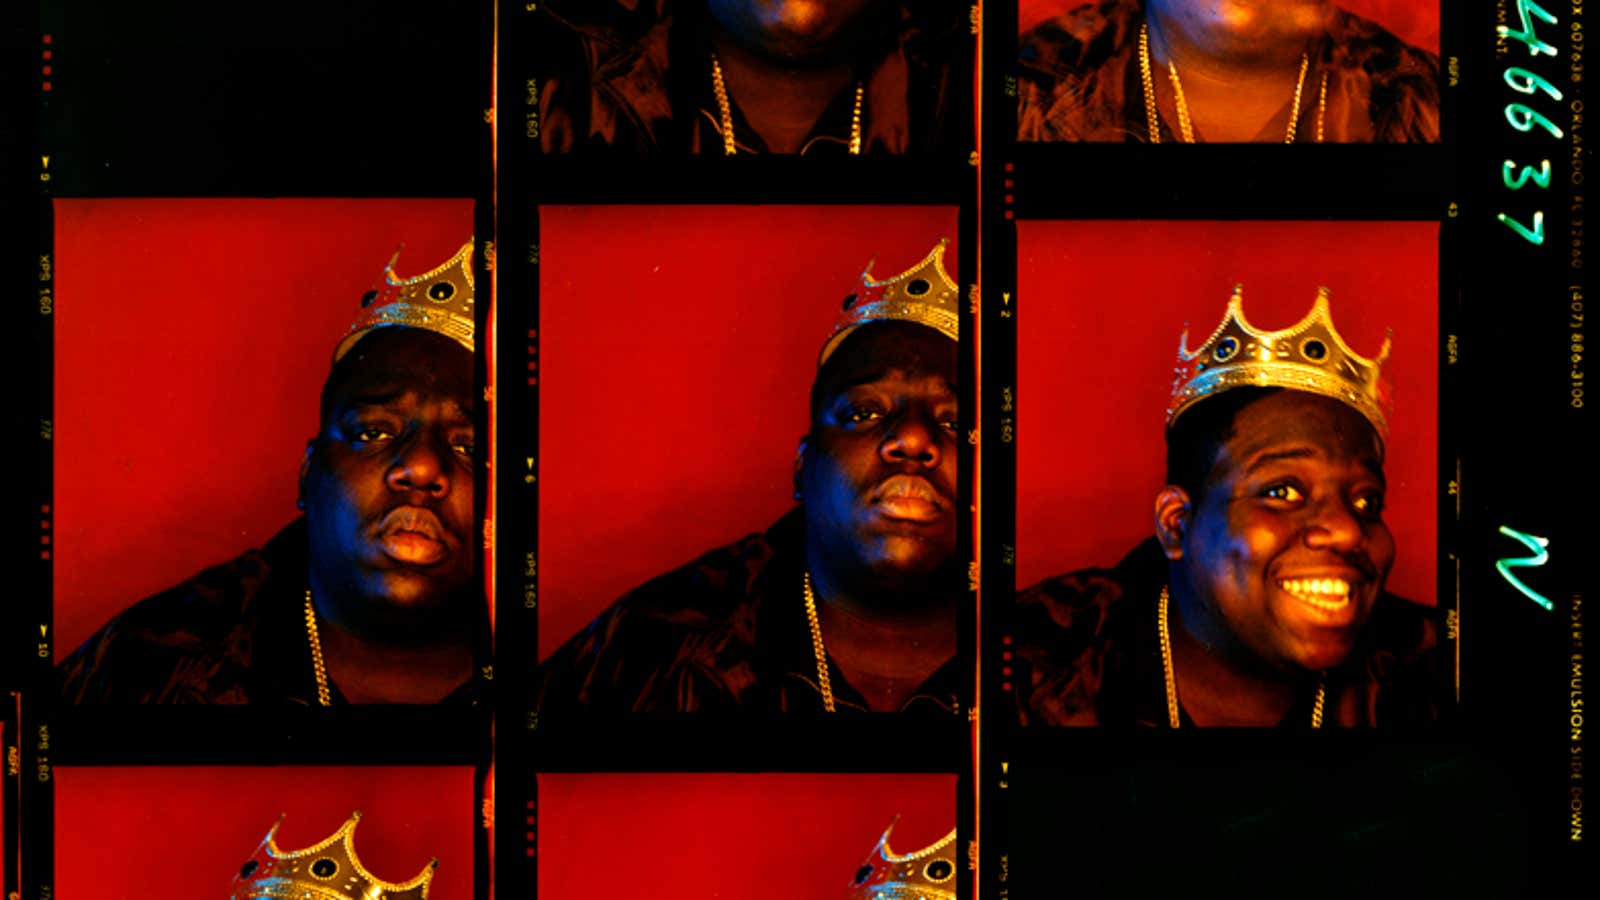 The many faces of Biggie.